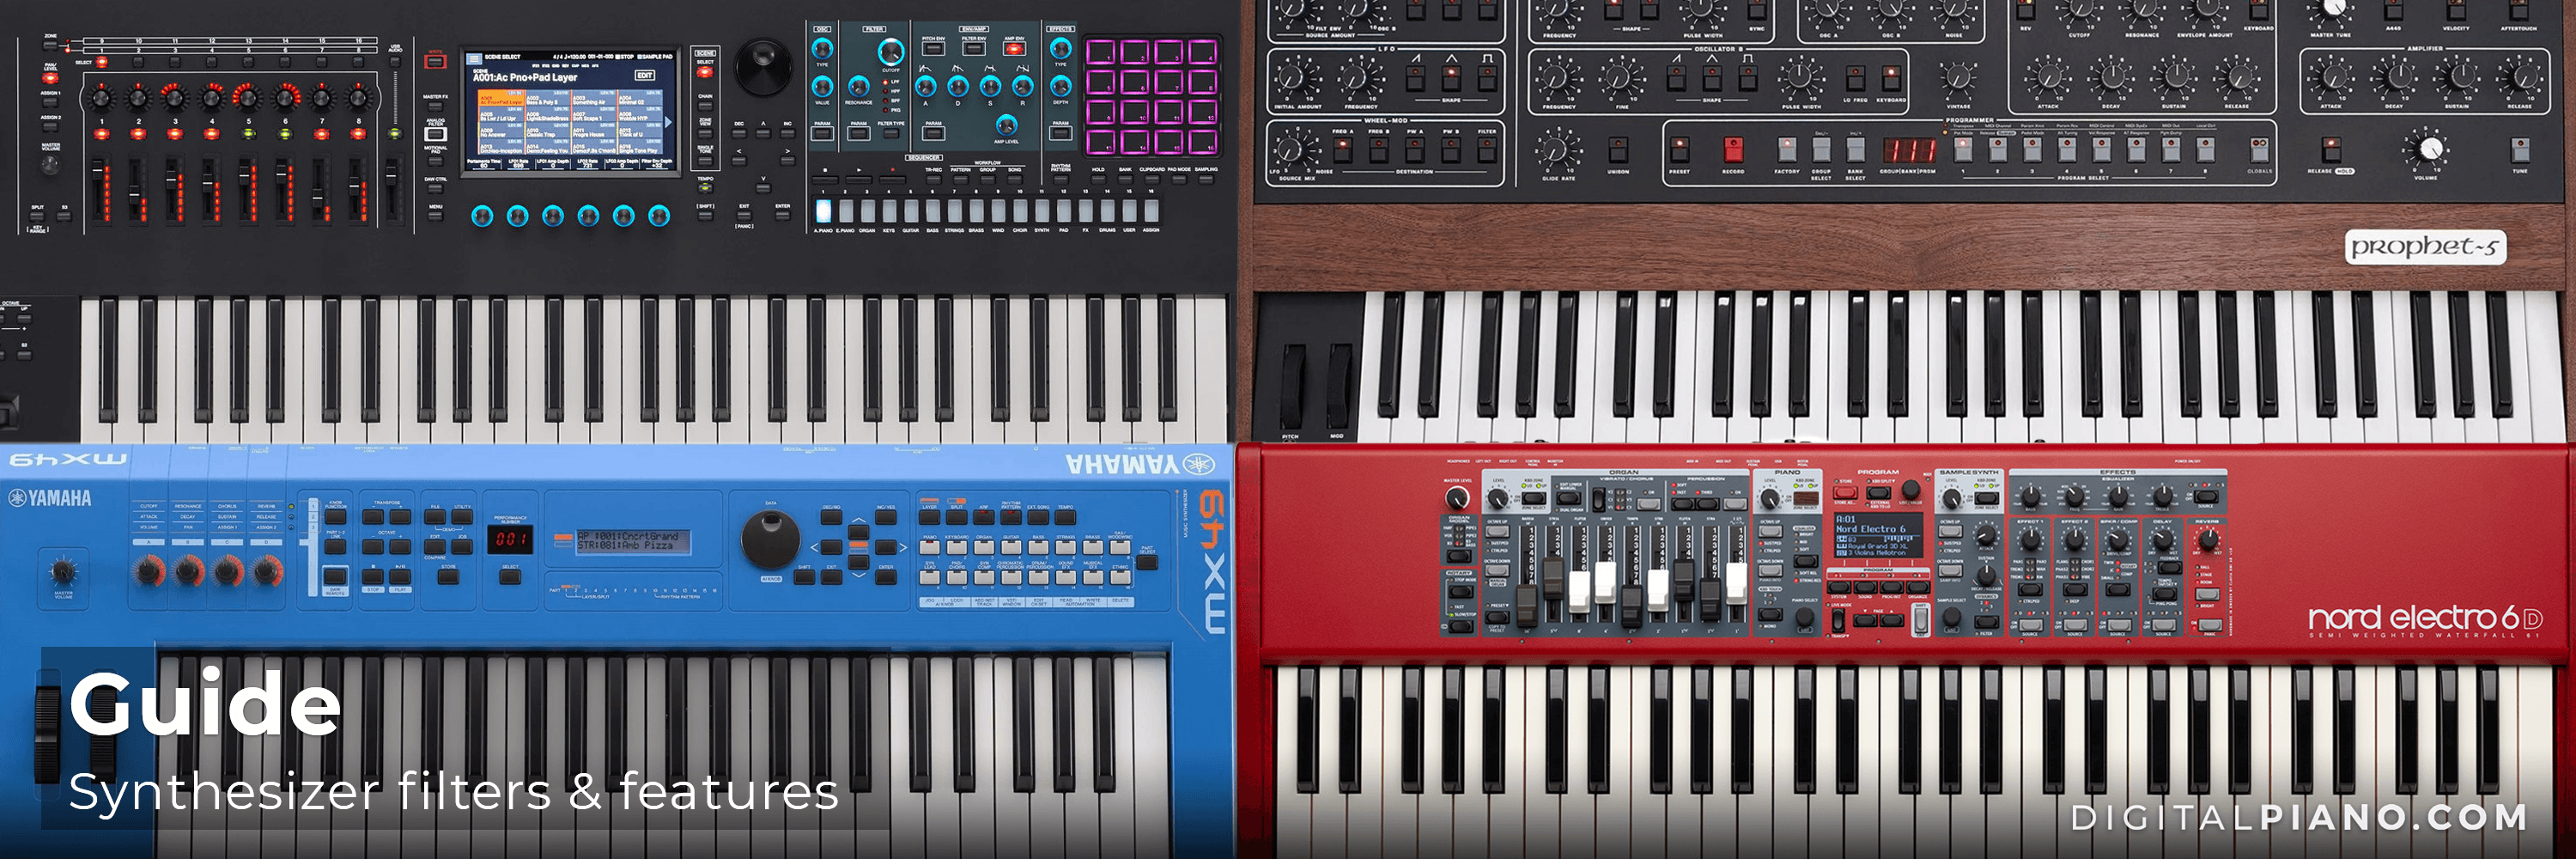 Guide to Synthesizer filters & features